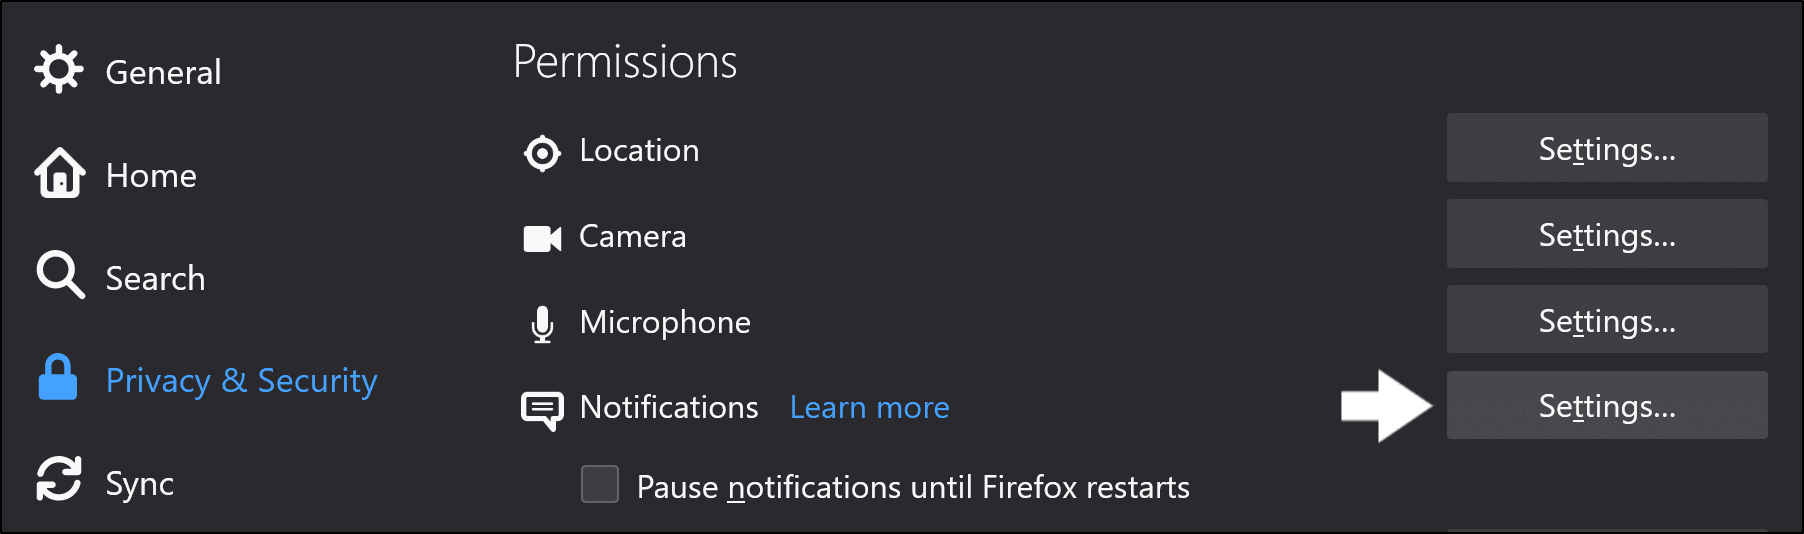 allow browser notification settings for YouTube website on Mozilla Firefox to fix notifications not working